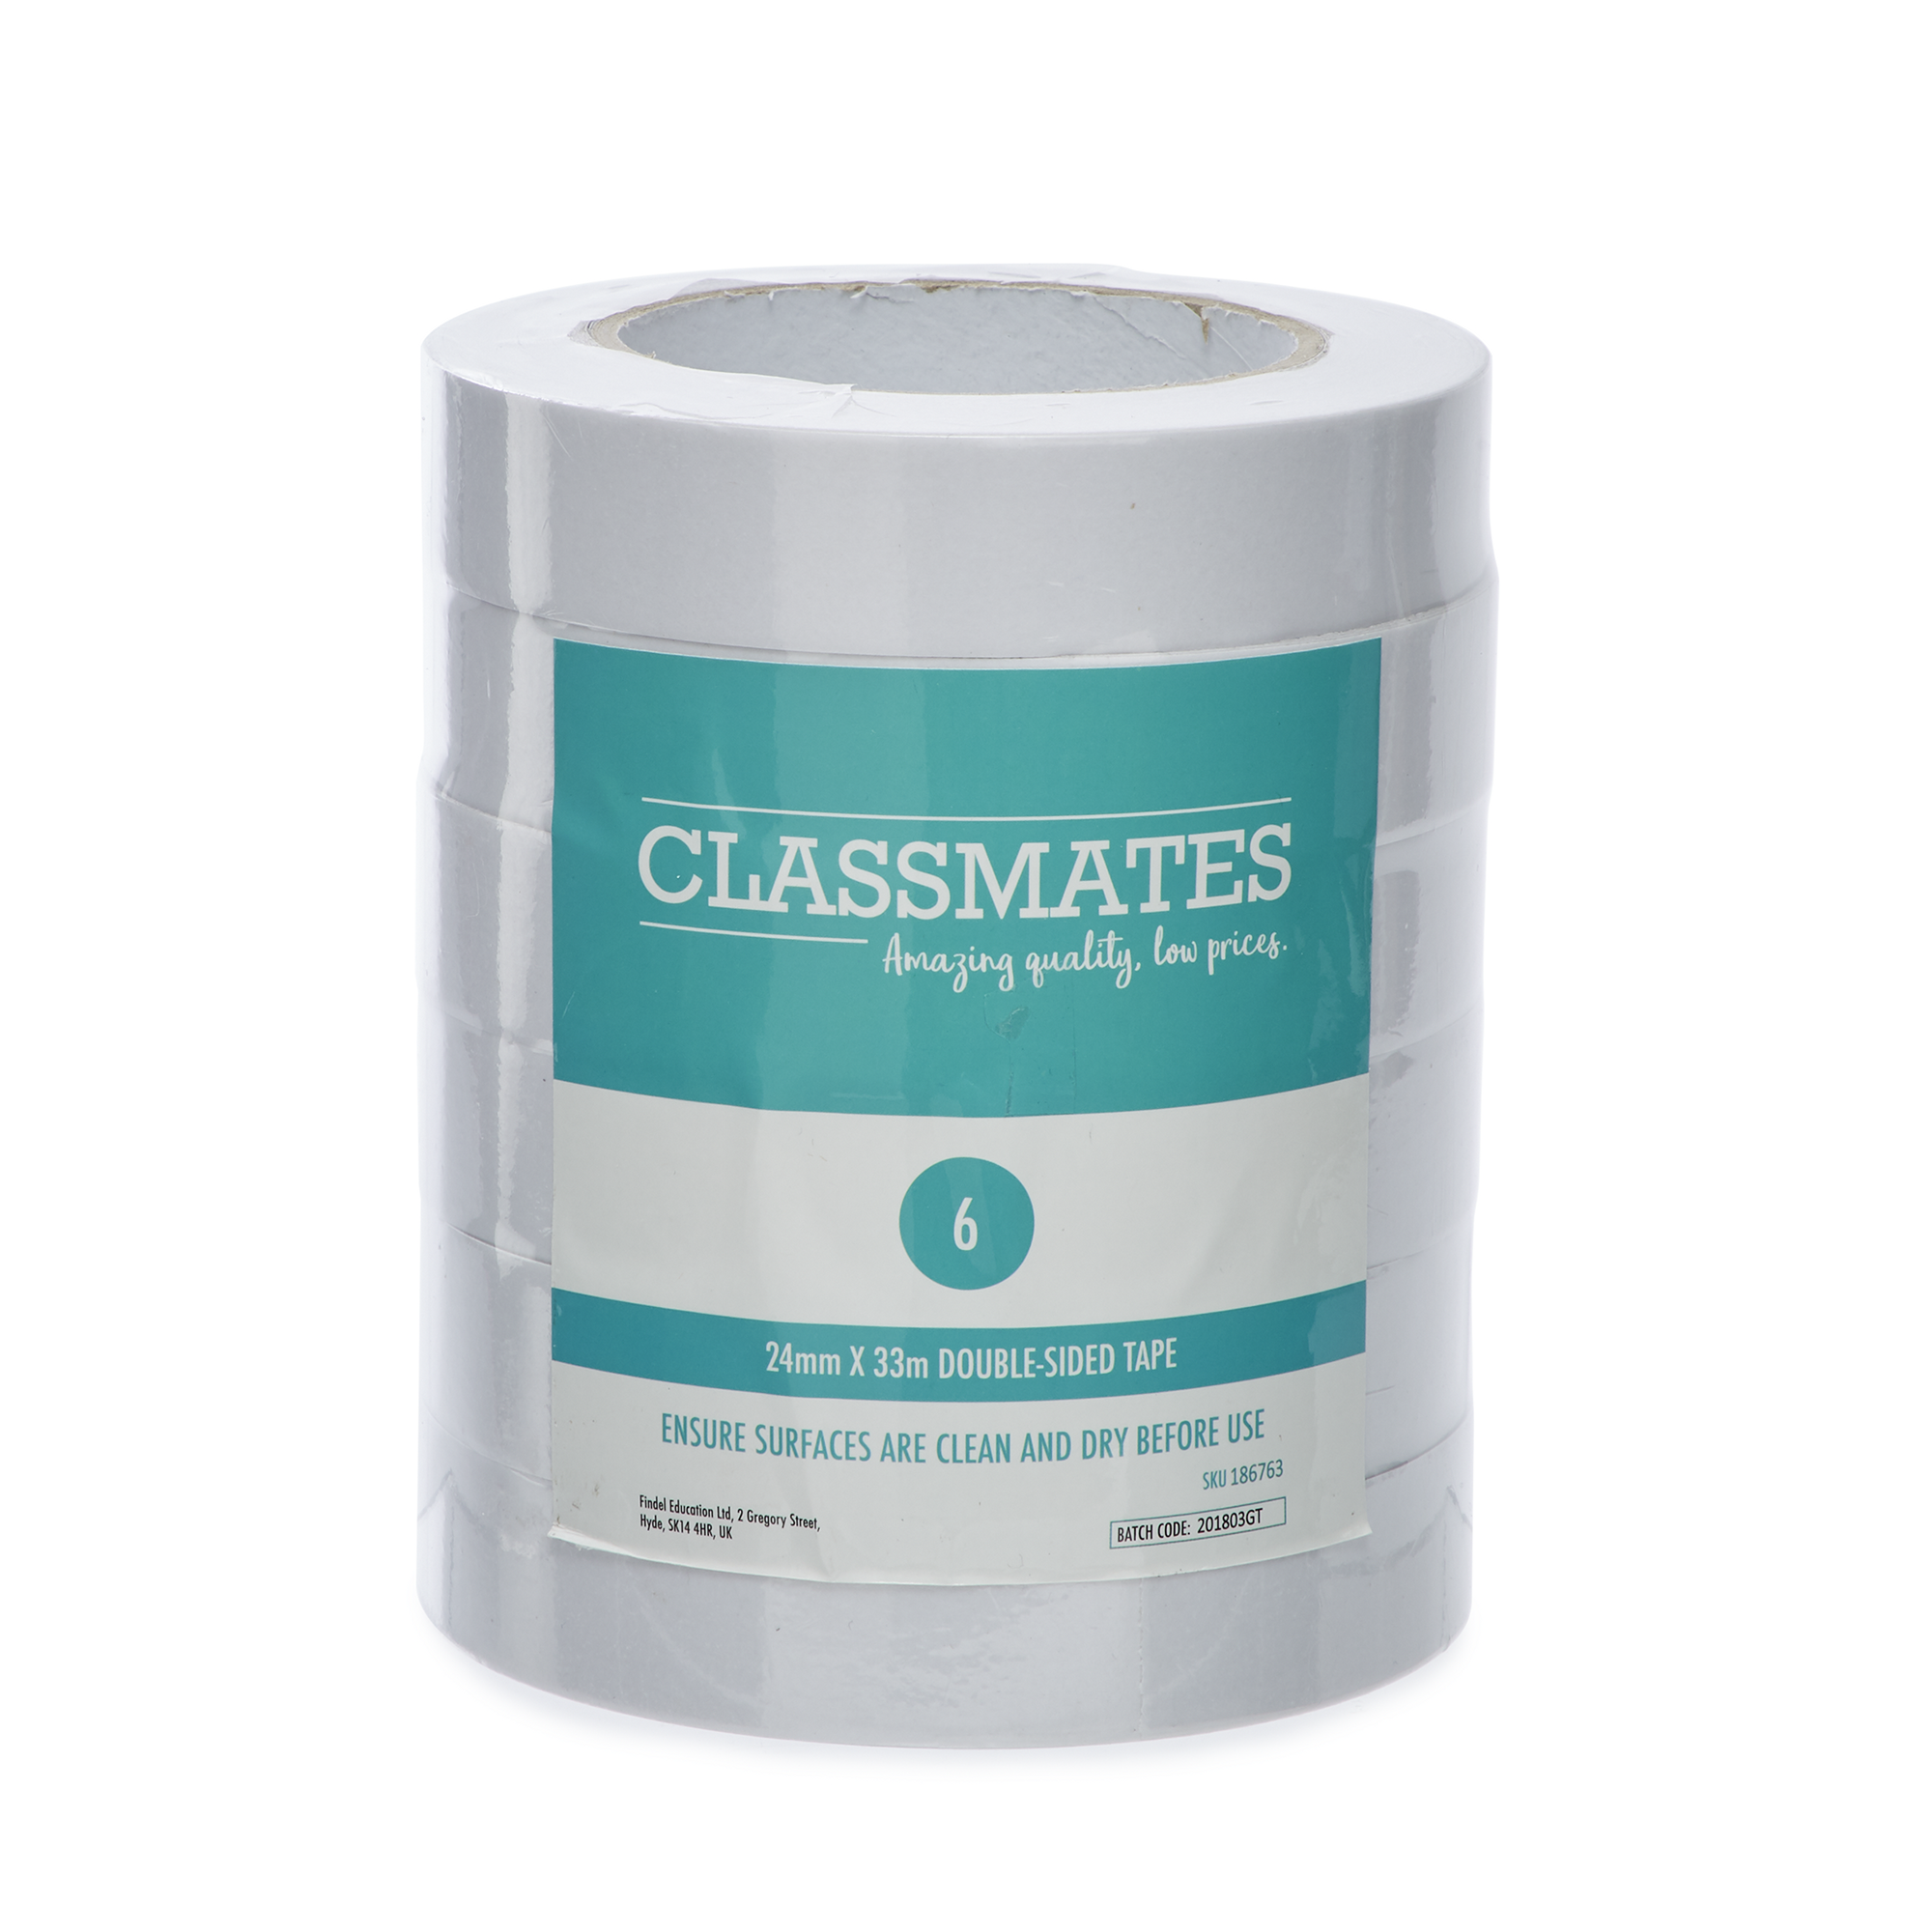 Classmates Double sided tape 24mm x 33m pack of 6